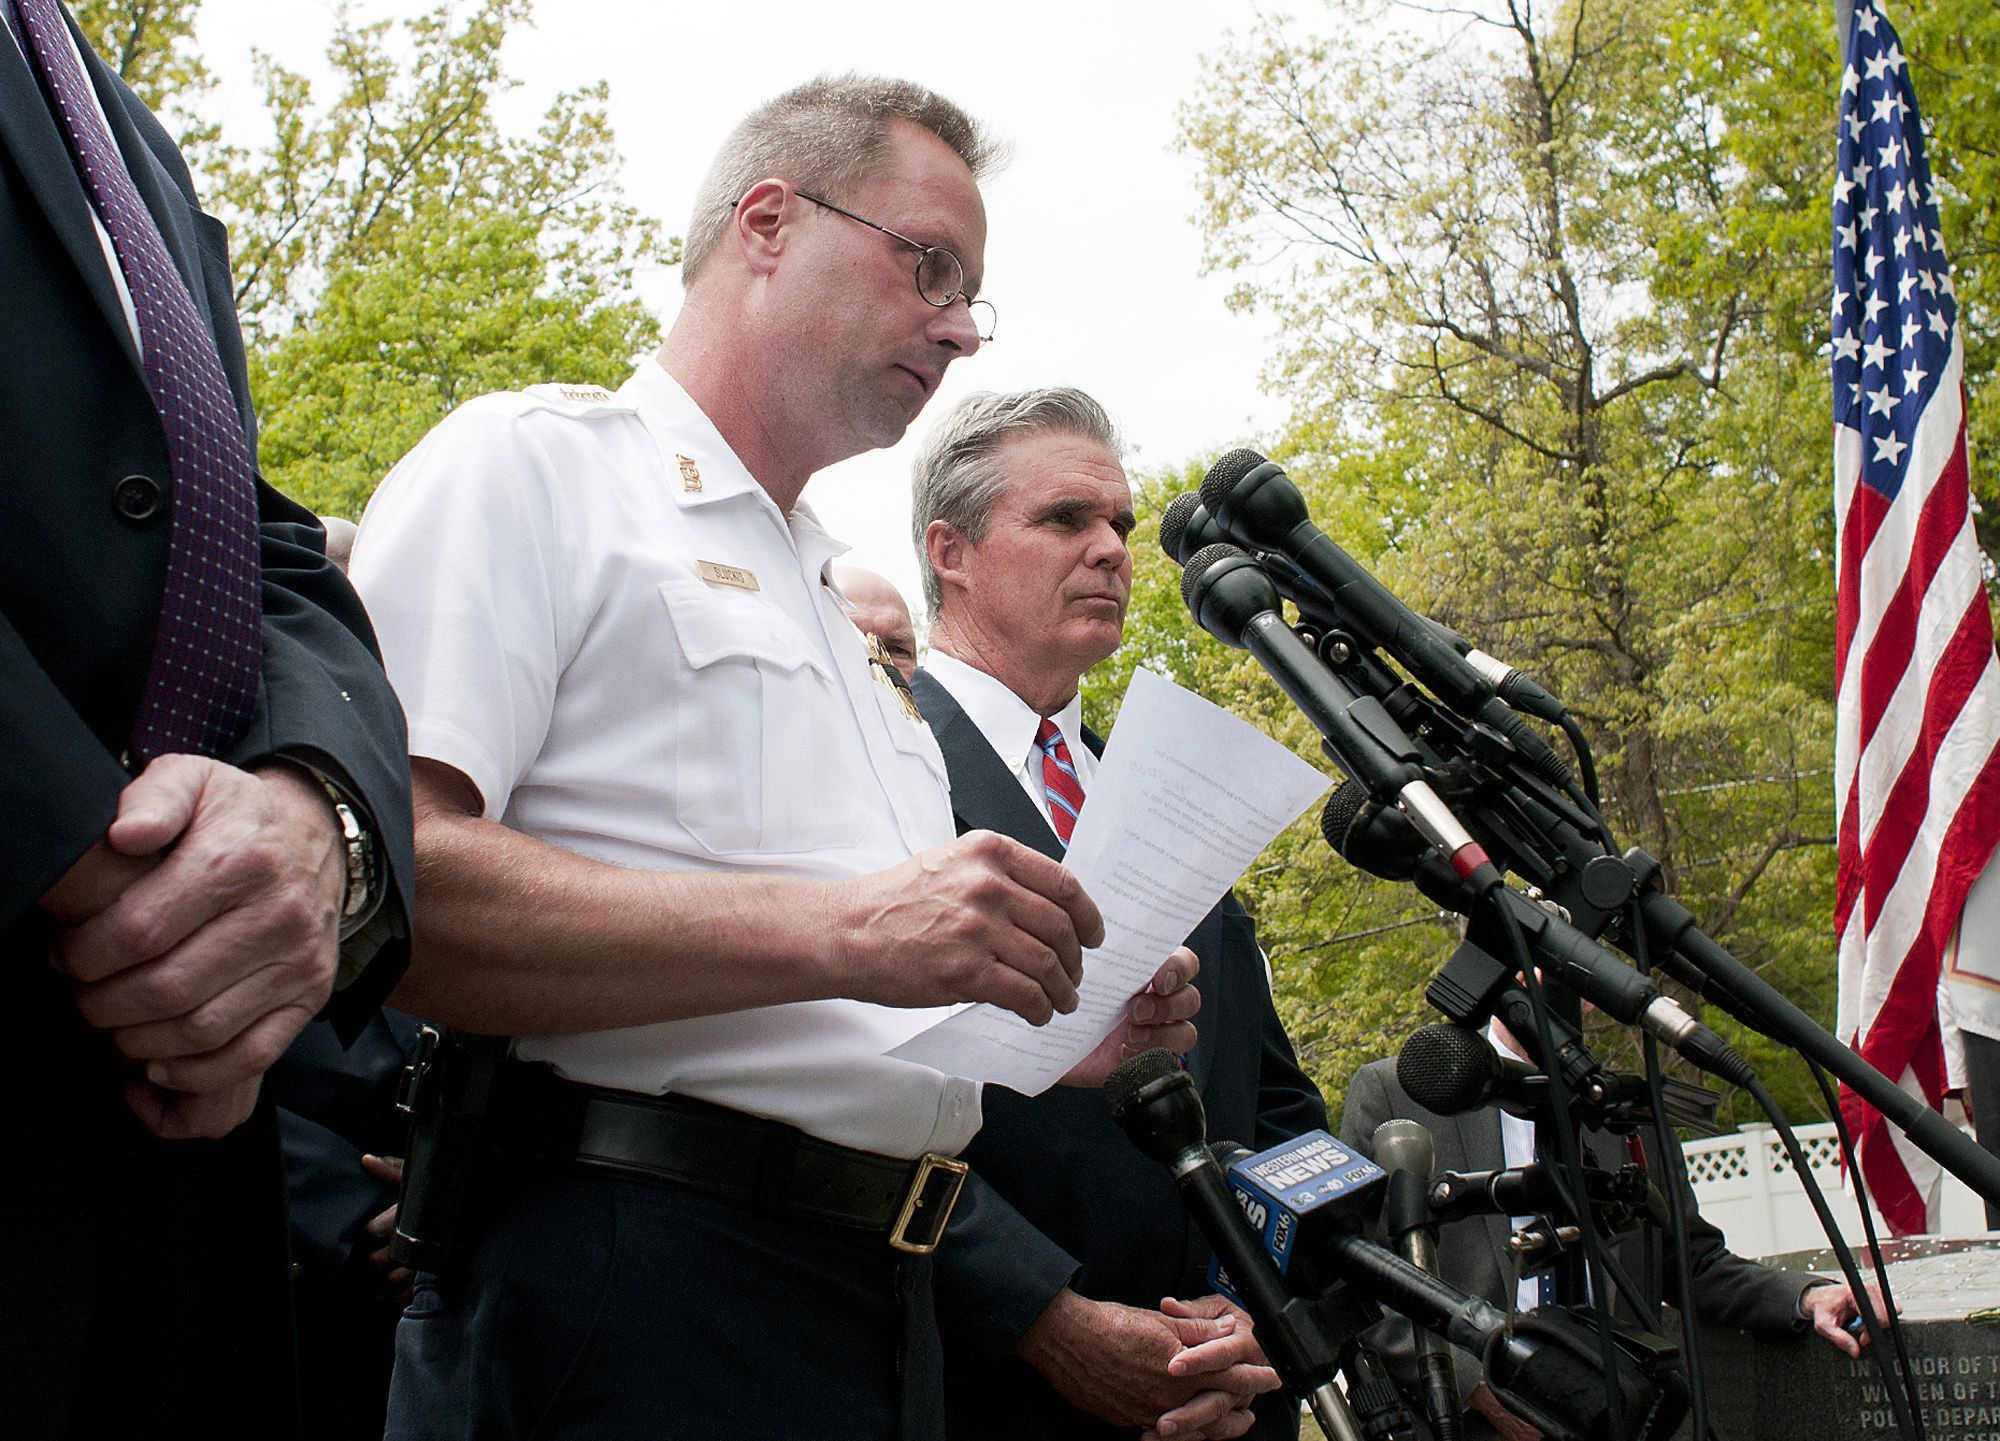 Rick Cinclair / Worcester Telegram & Gazette Auburn Police Chief Andrew Sluckis reads a statement about Auburn police Officer Ronald Tarentino who was was fatally shot during a traffic stop in Auburn, Massachusetts on Sunday. Worcester County District Attorney Joseph D. Early, Jr., (right) joins Sluckis at the briefing.